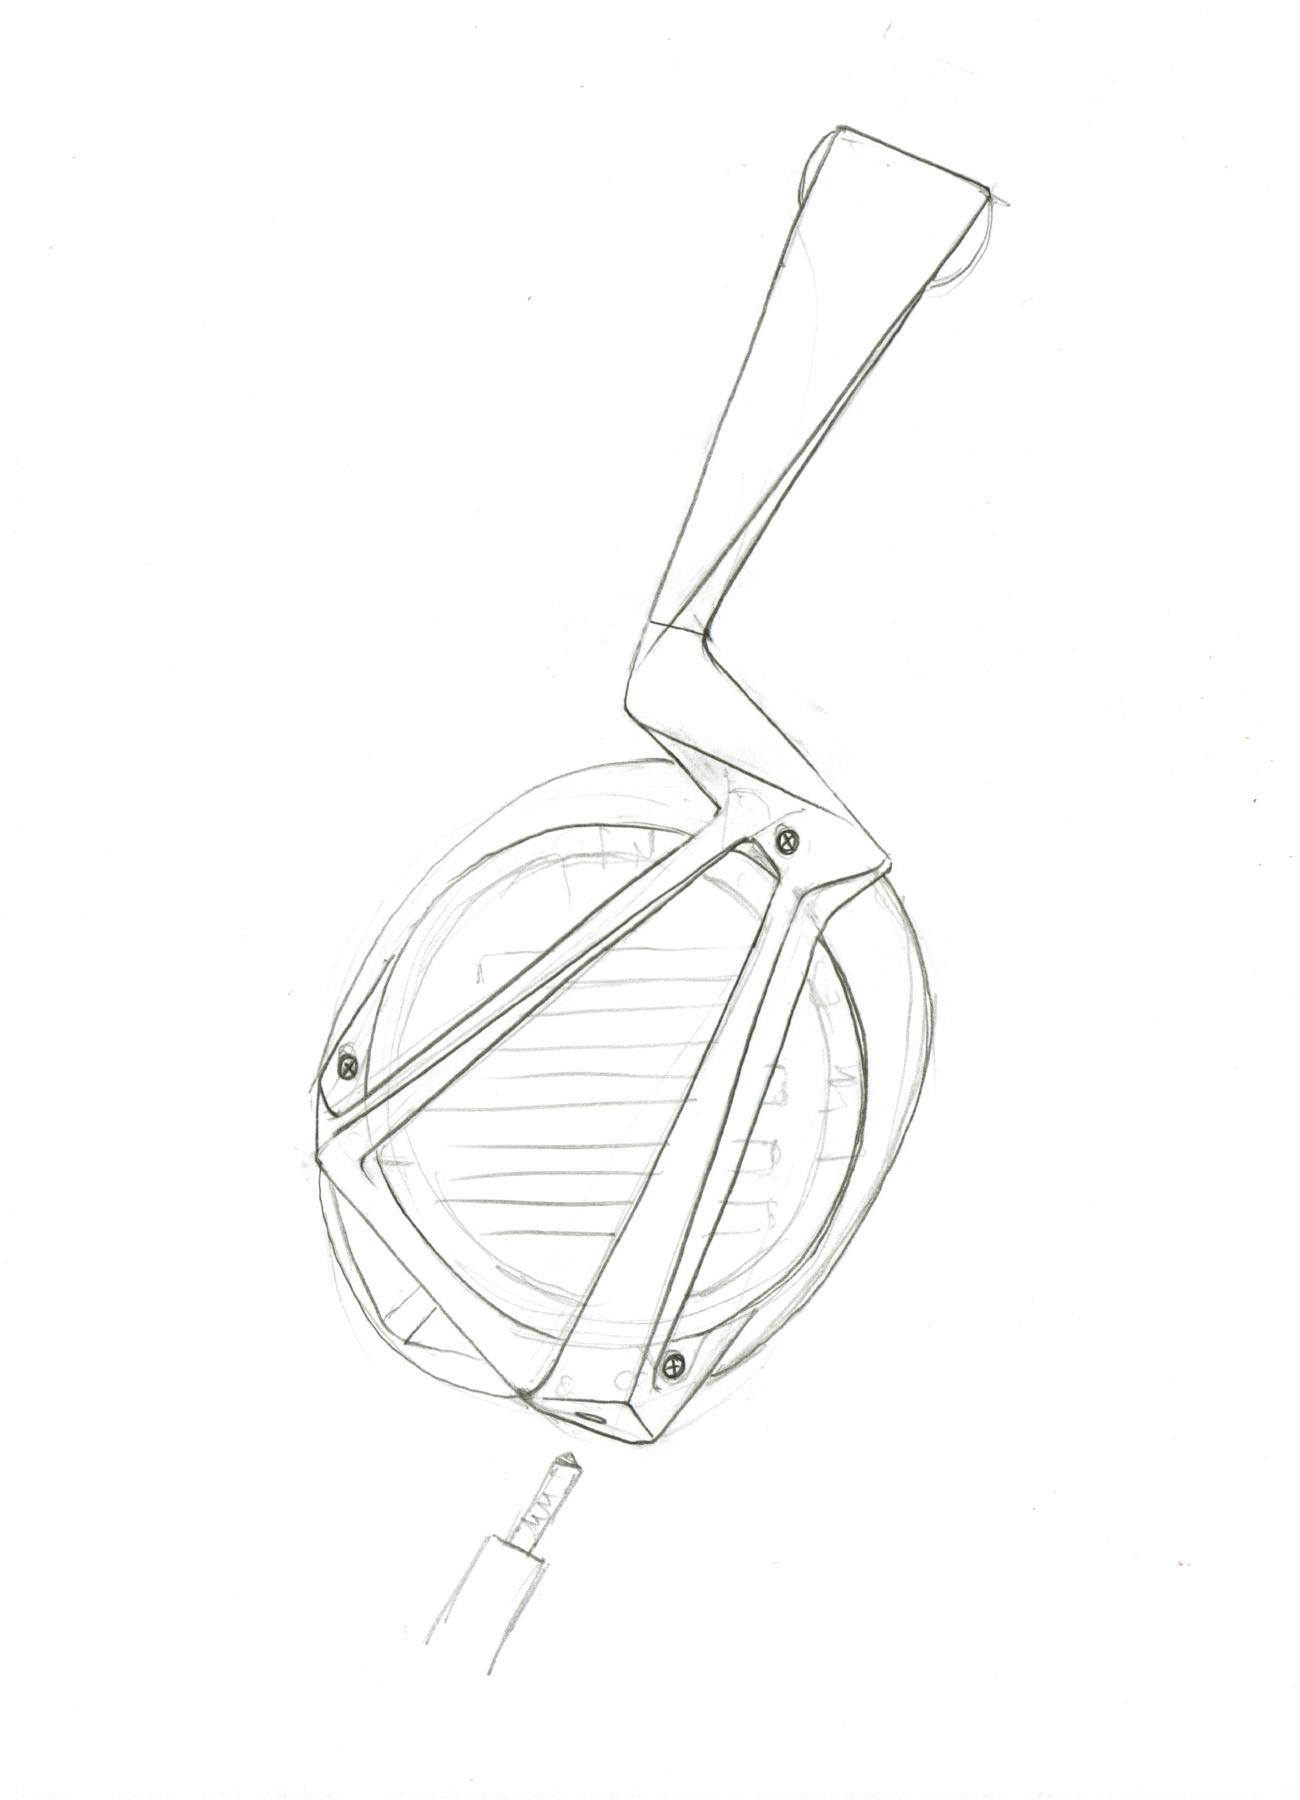 Line sketch of the side of the chosen design. The frame of the headphones is very minimal, with only two arms holding each driver unit in place.